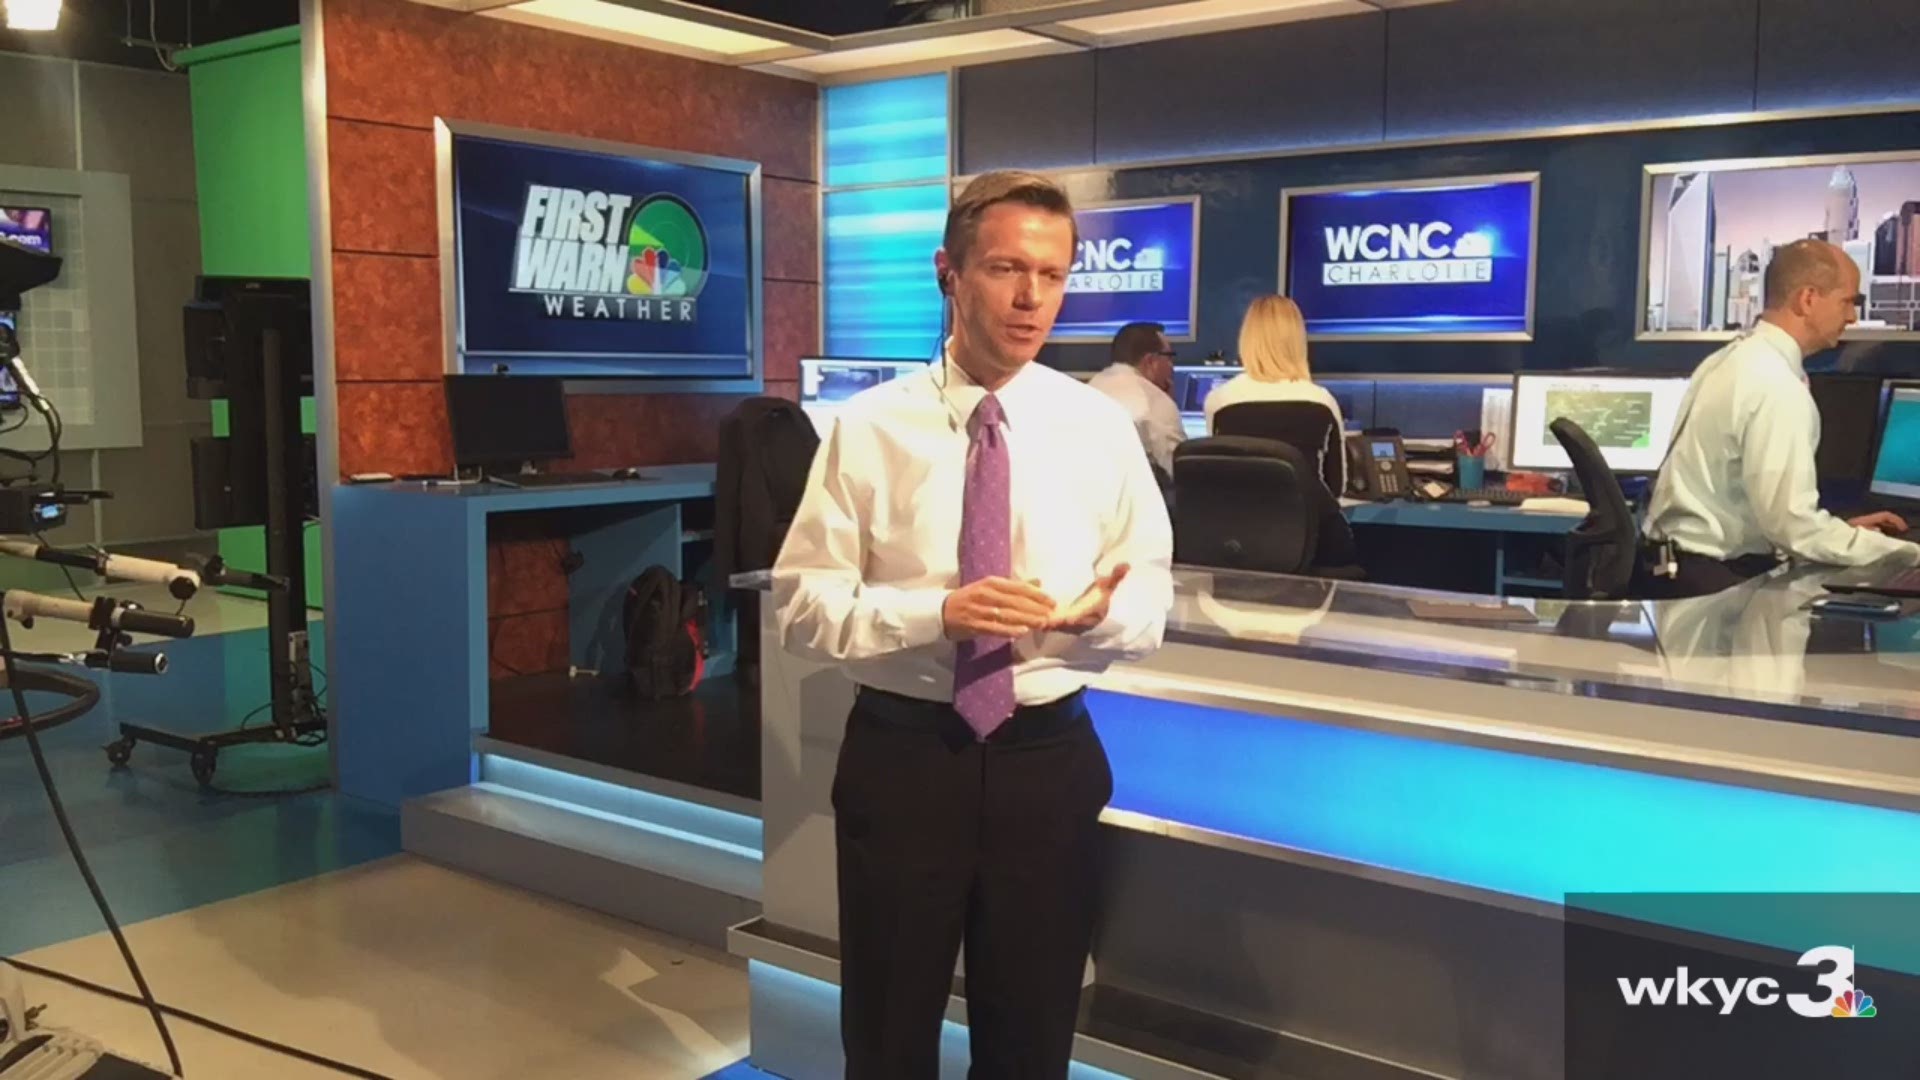 Oct. 2, 2015: Channel 3 meteorologist Greg Dee is helping our sister station WCNC in Charlotte, N.C. as they track Hurricane Joaquin.